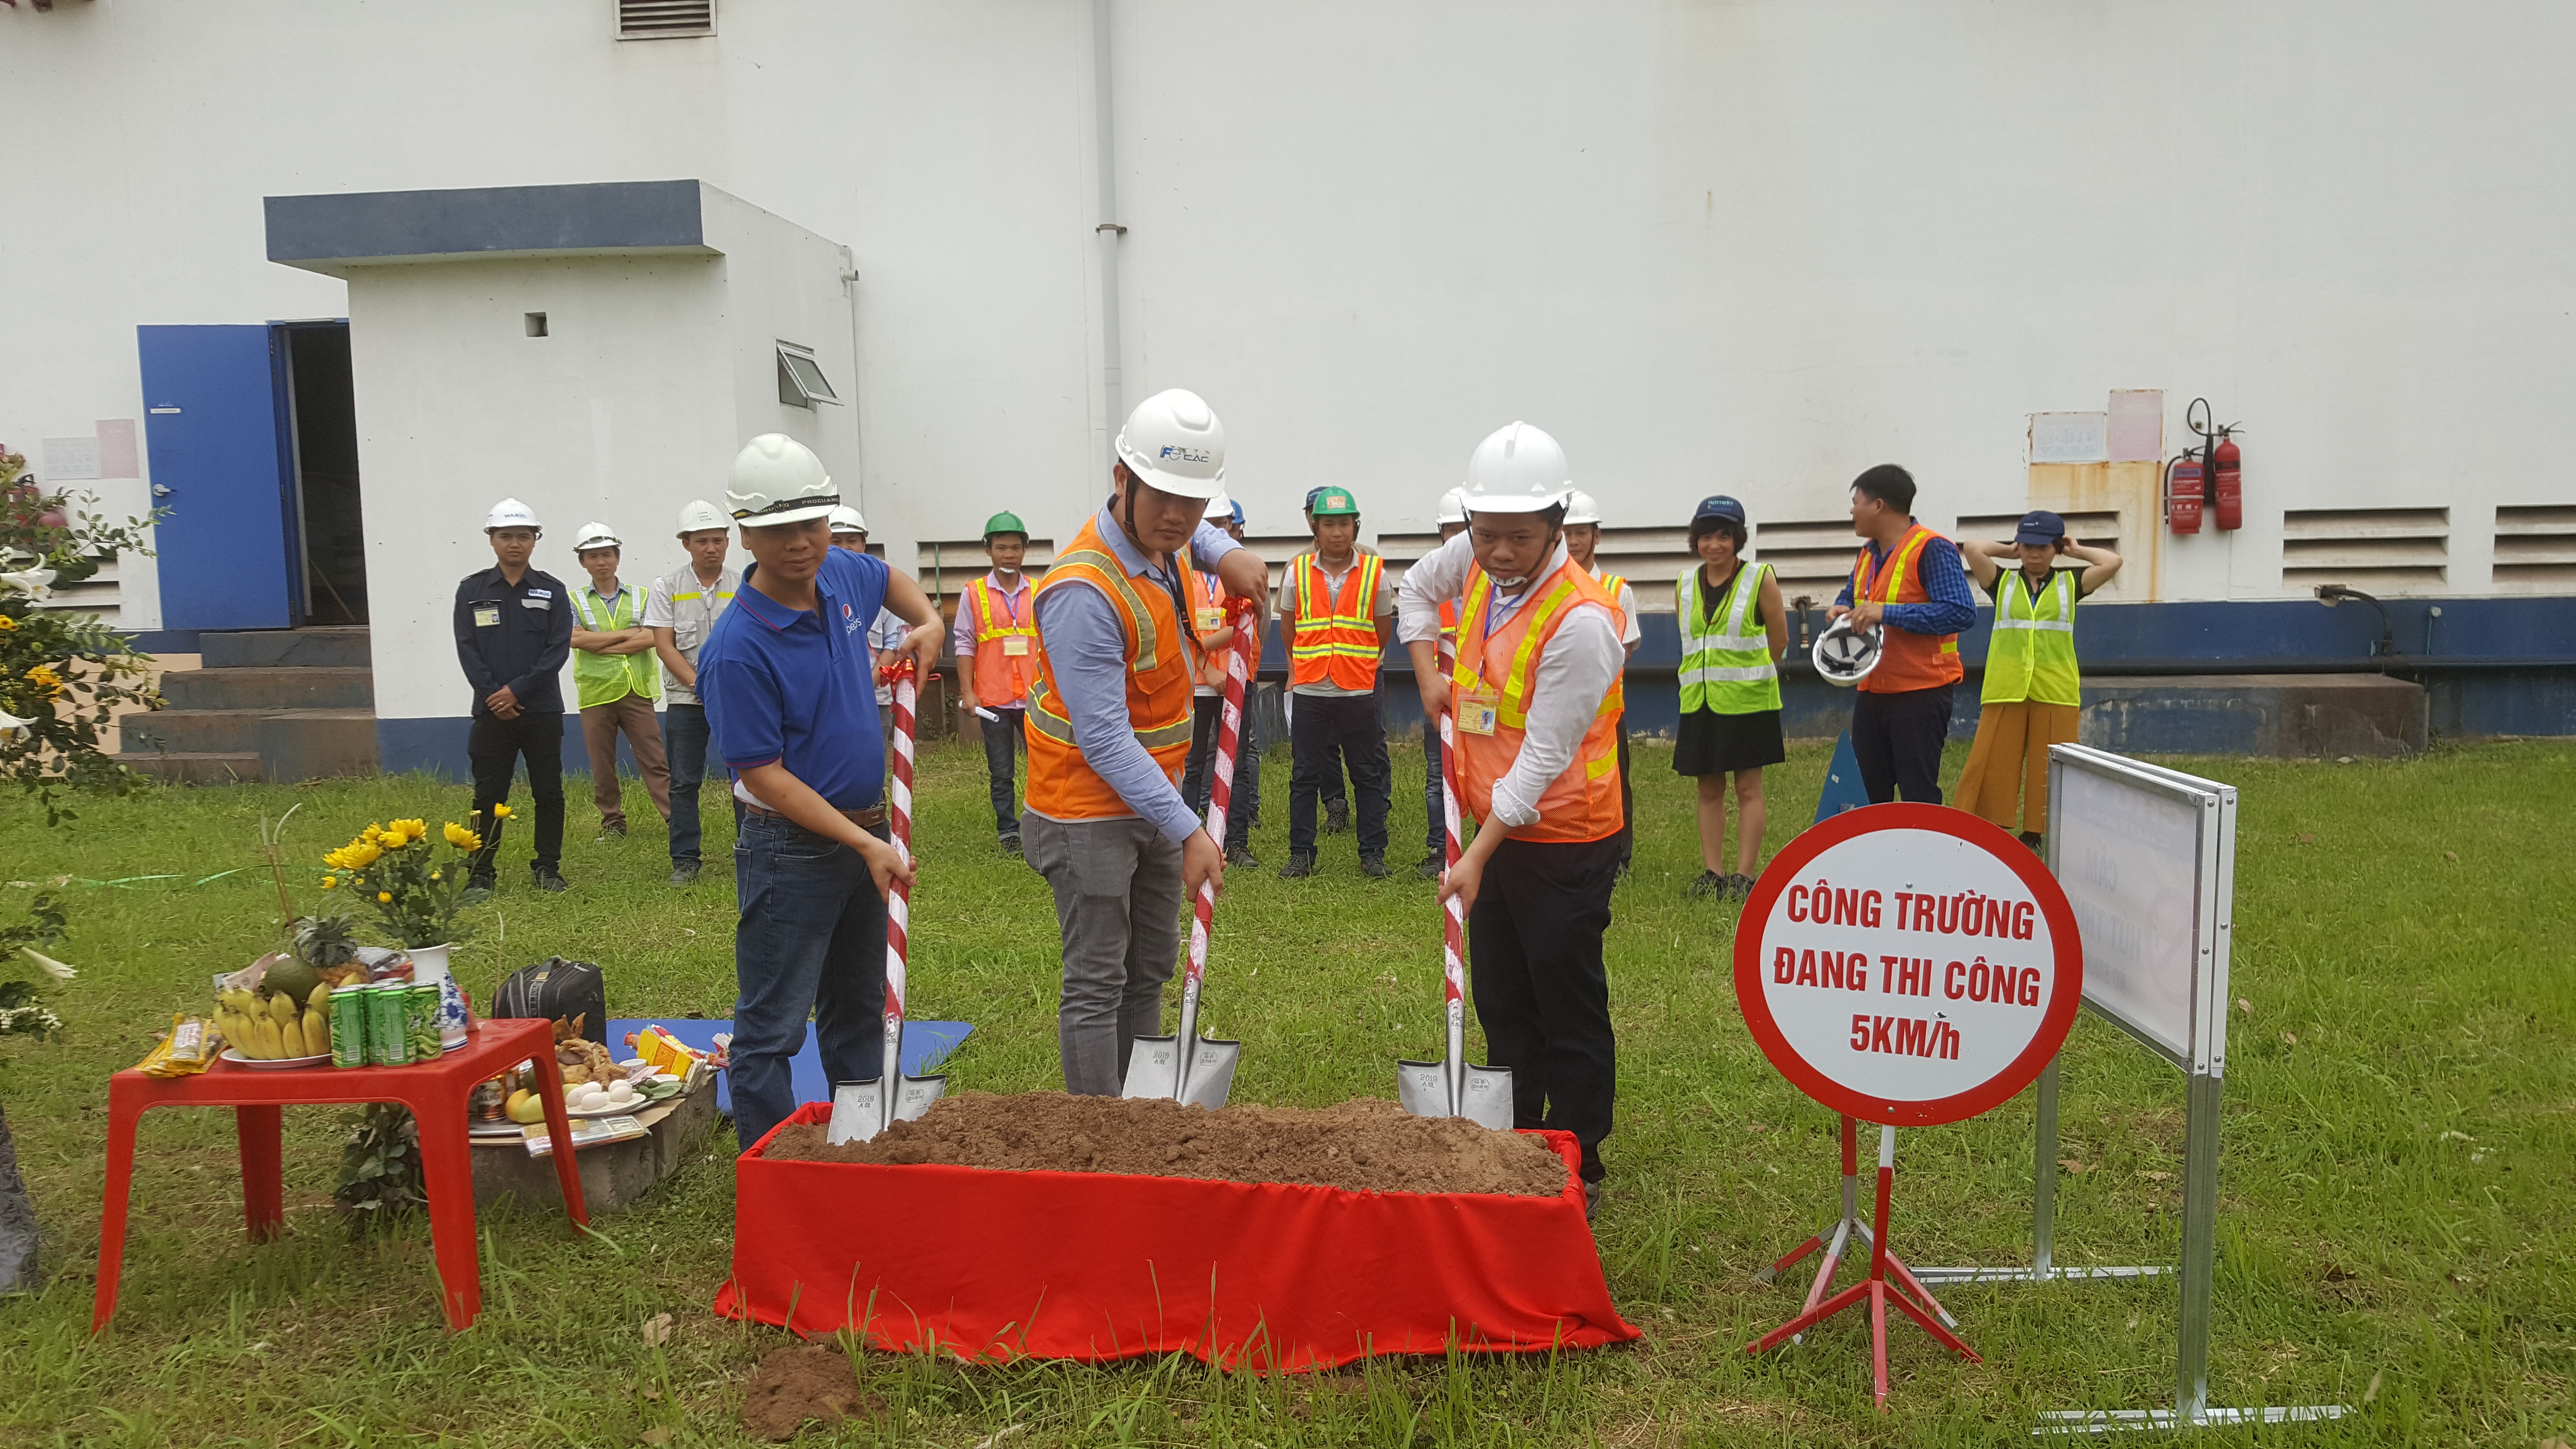 The project team is holding a breaking-ground ceremony at VSIP Bac Ninh.